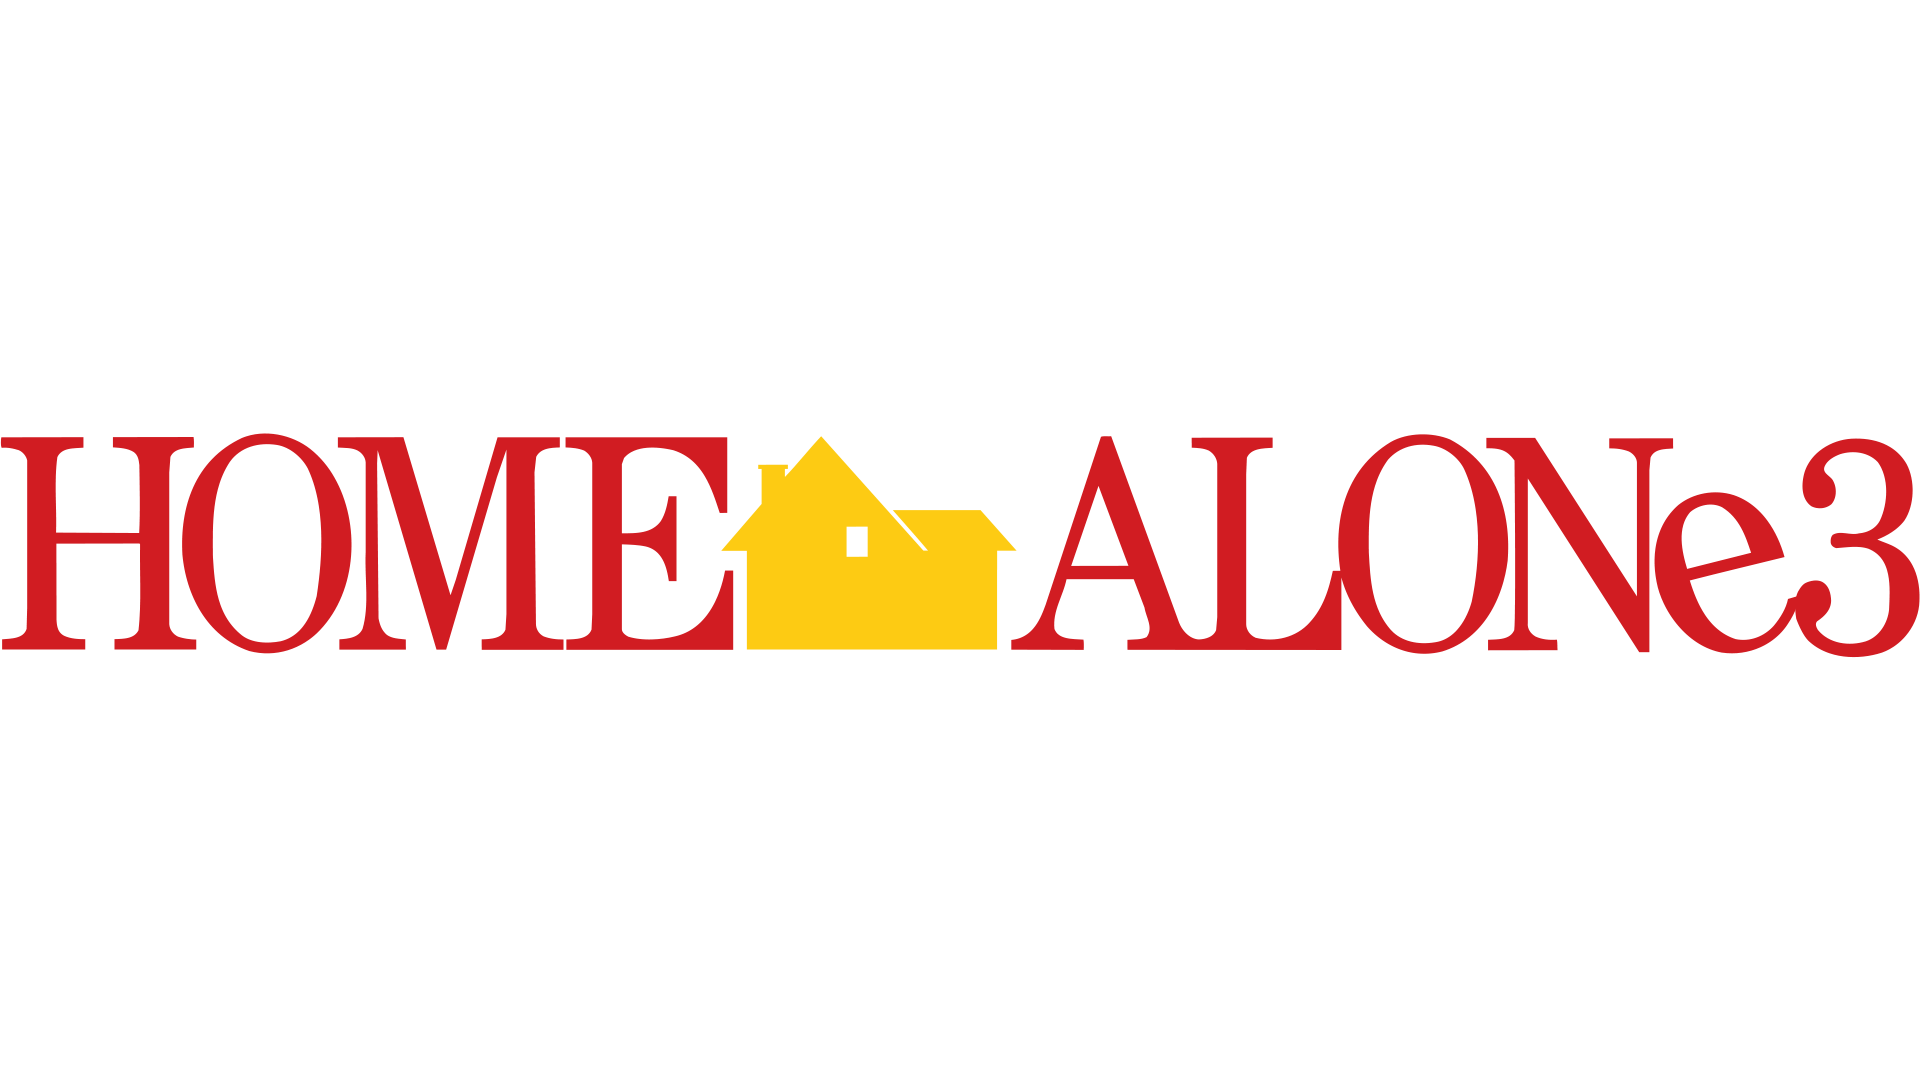 home alone full movie online free watch